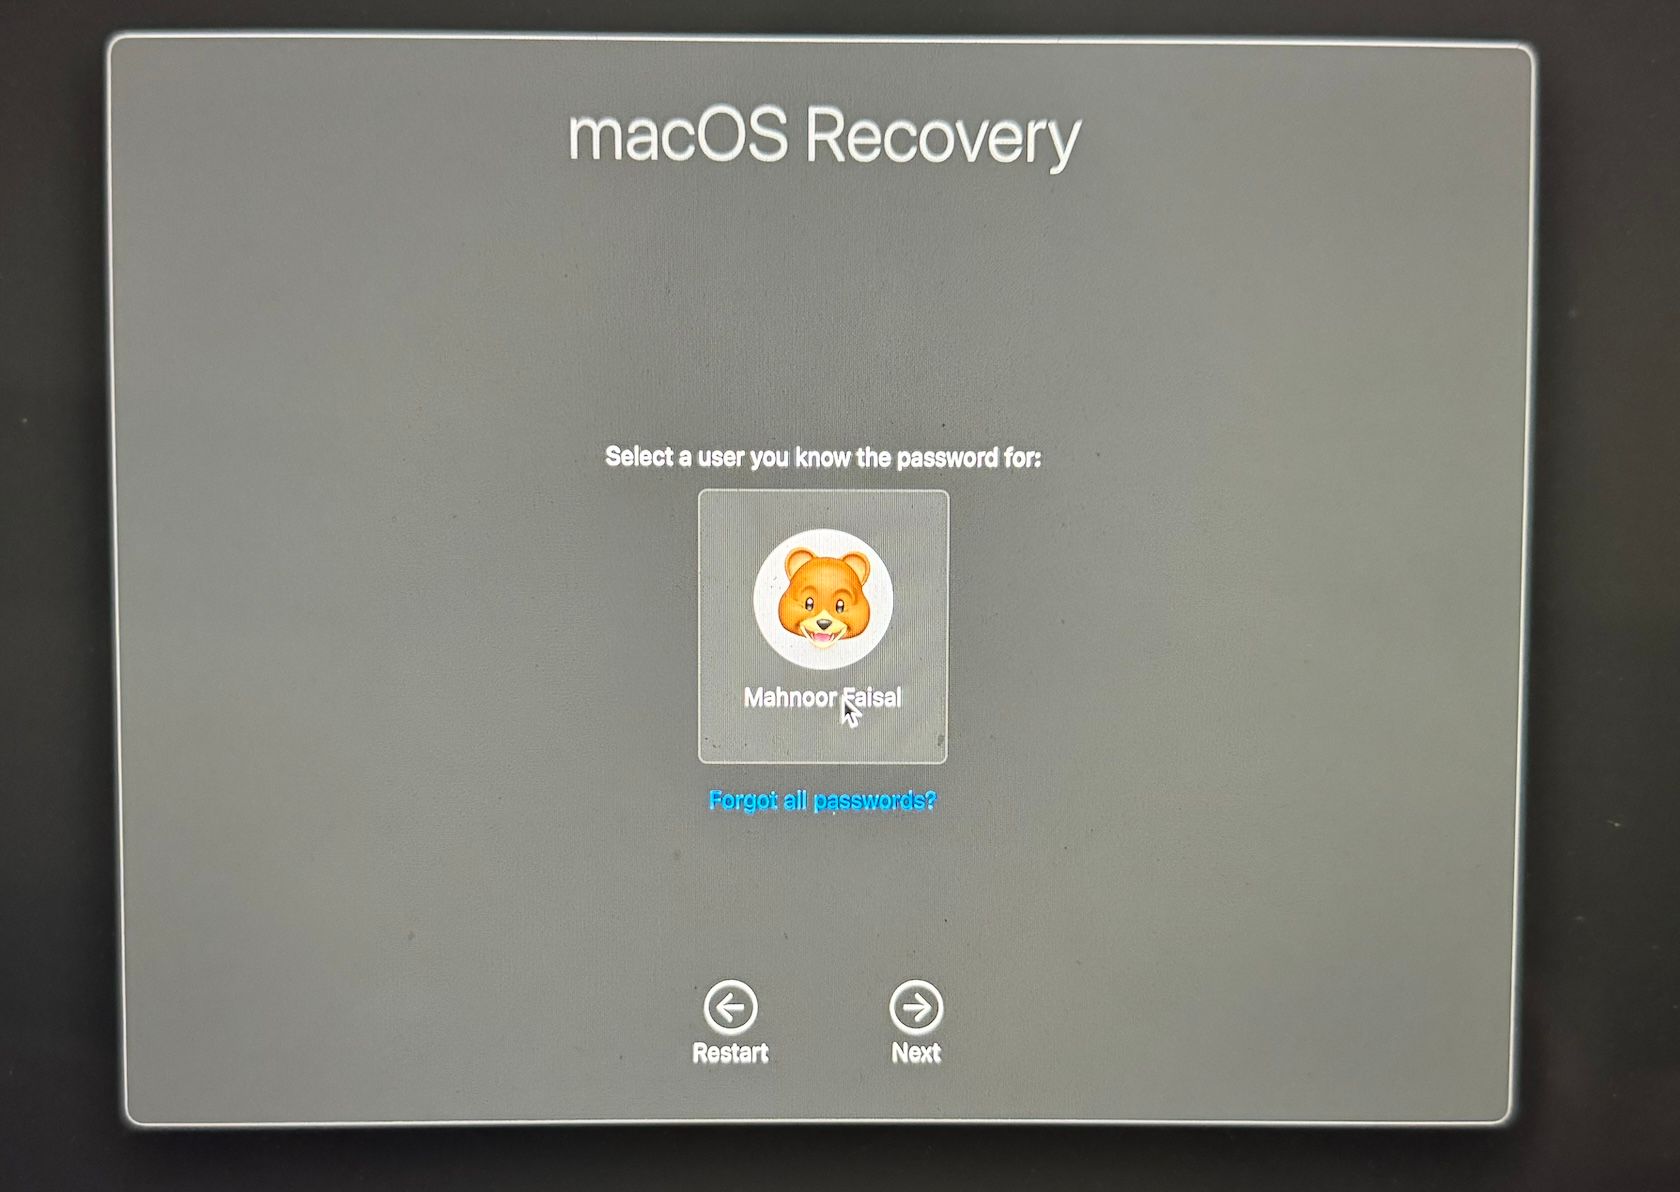 macOS Recovery screen